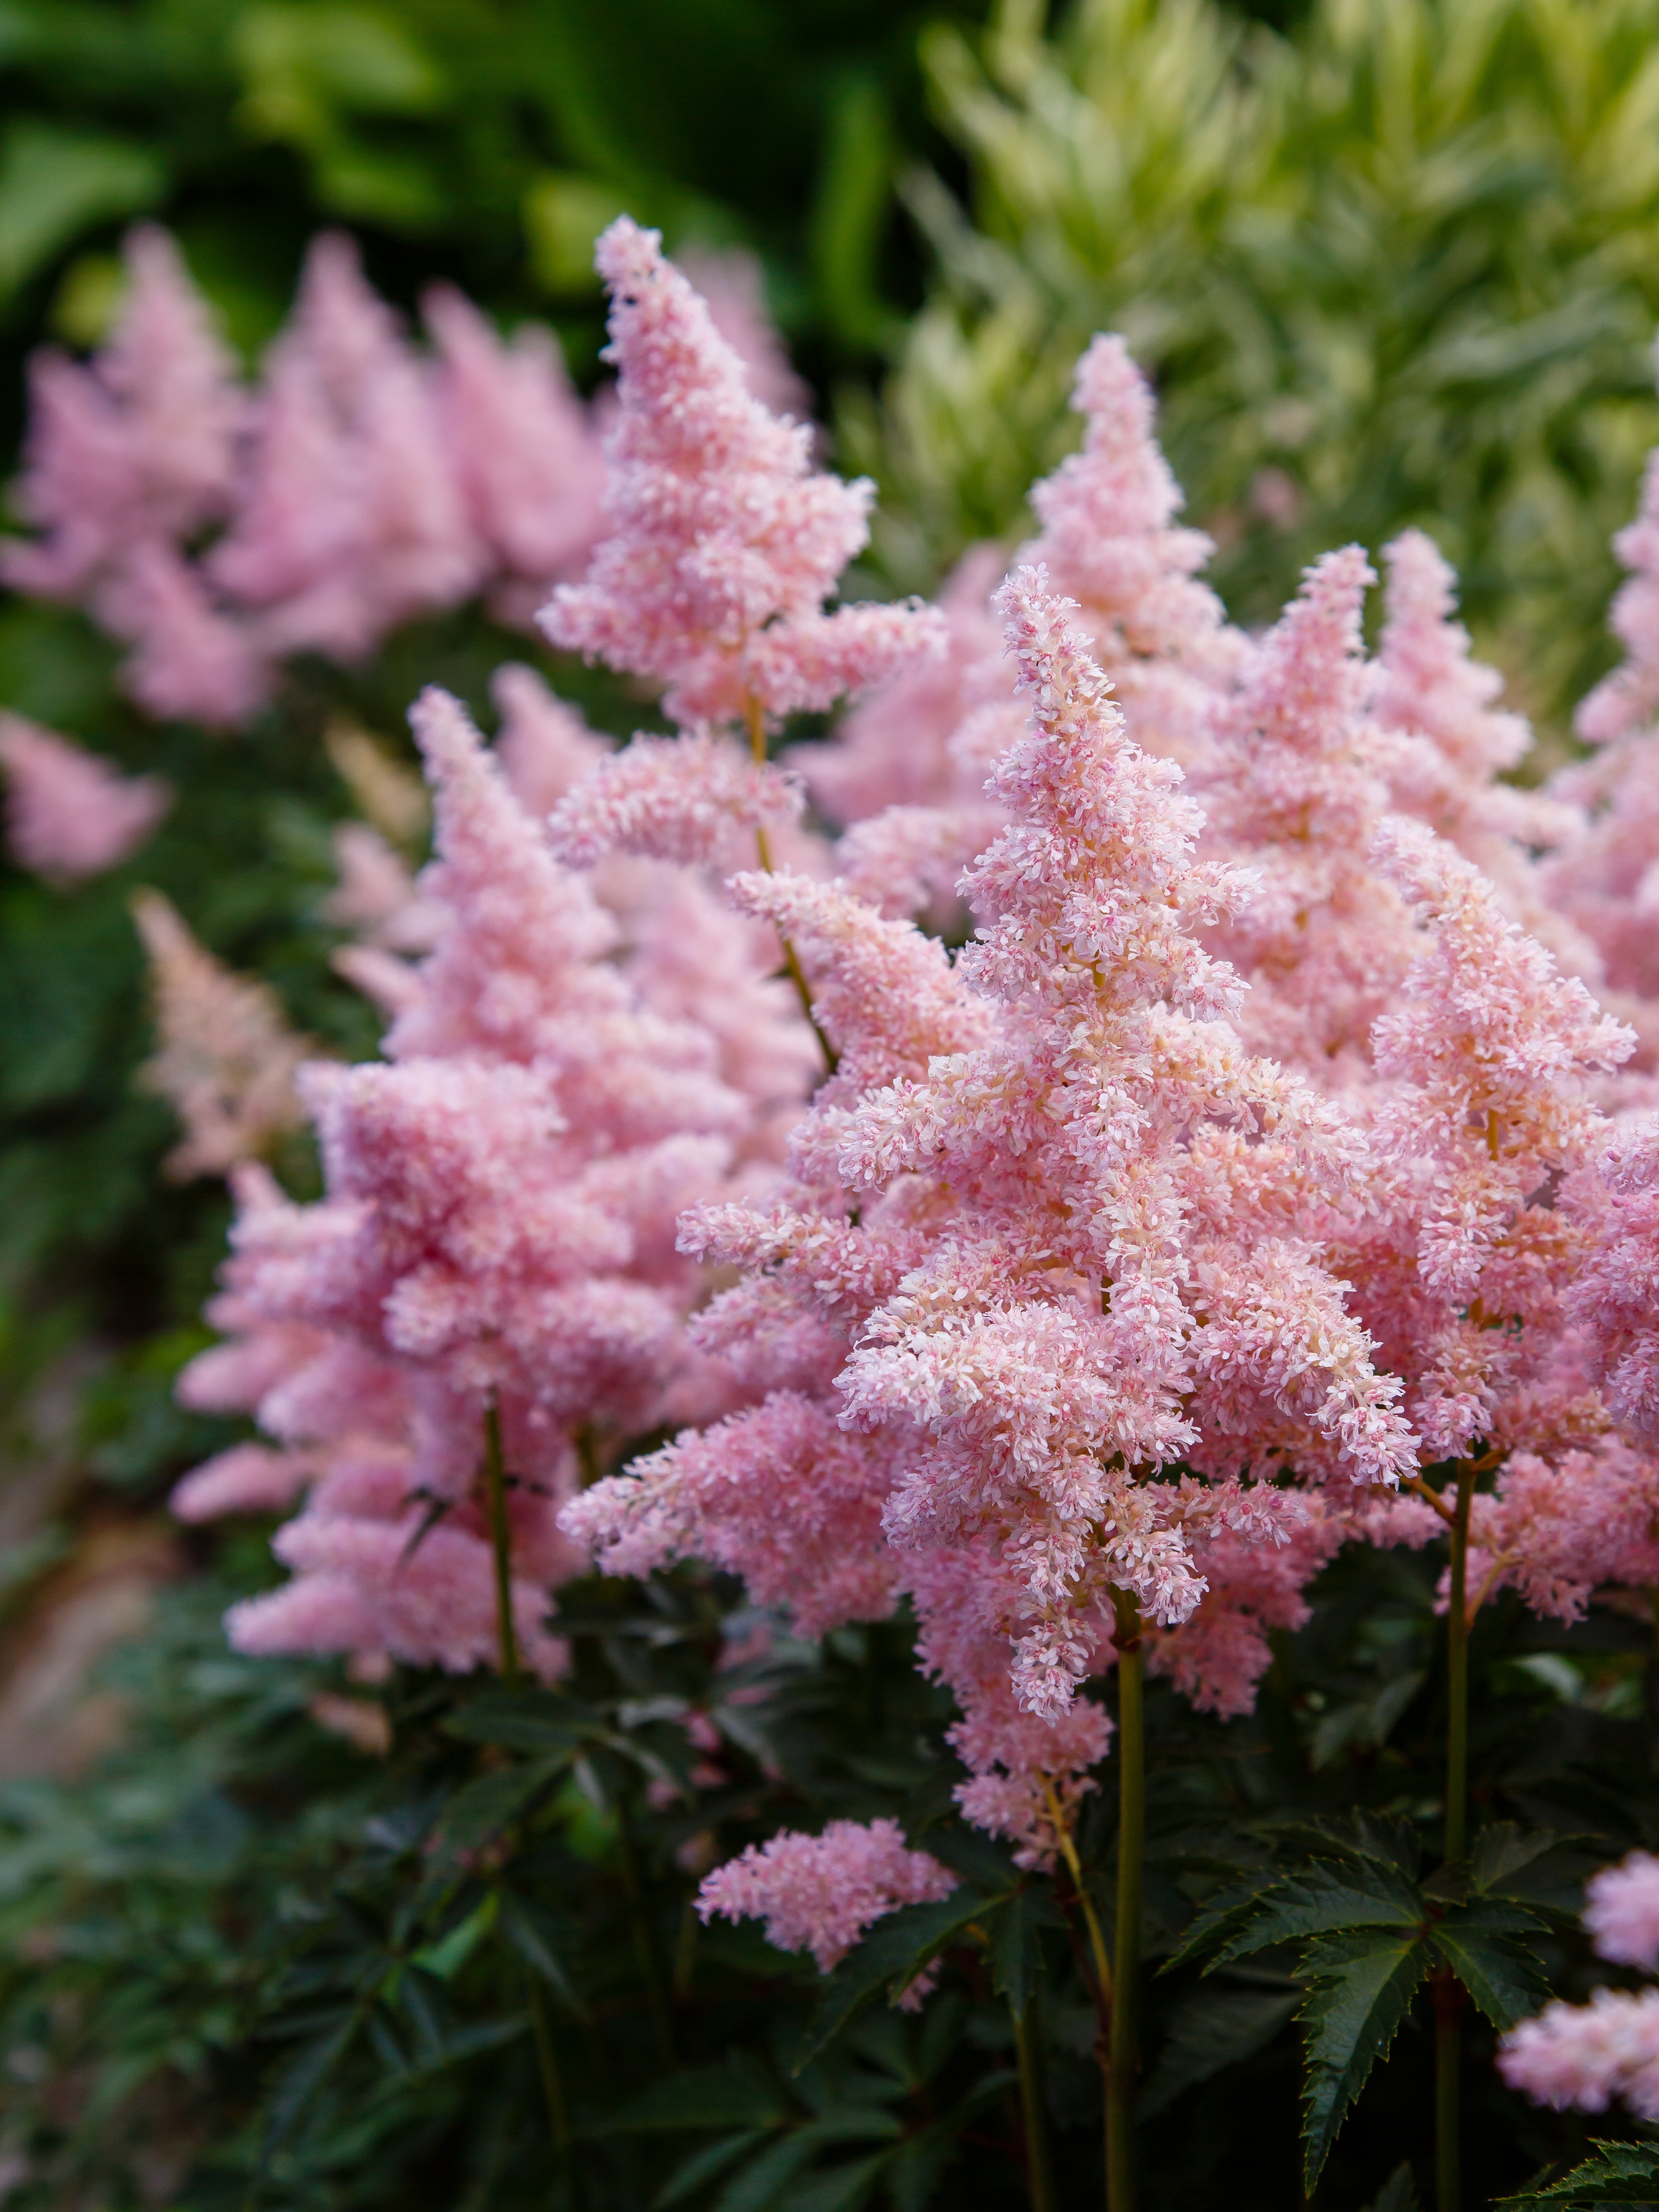 Pink Astilbe flowers grow on deep green foliage in the garde